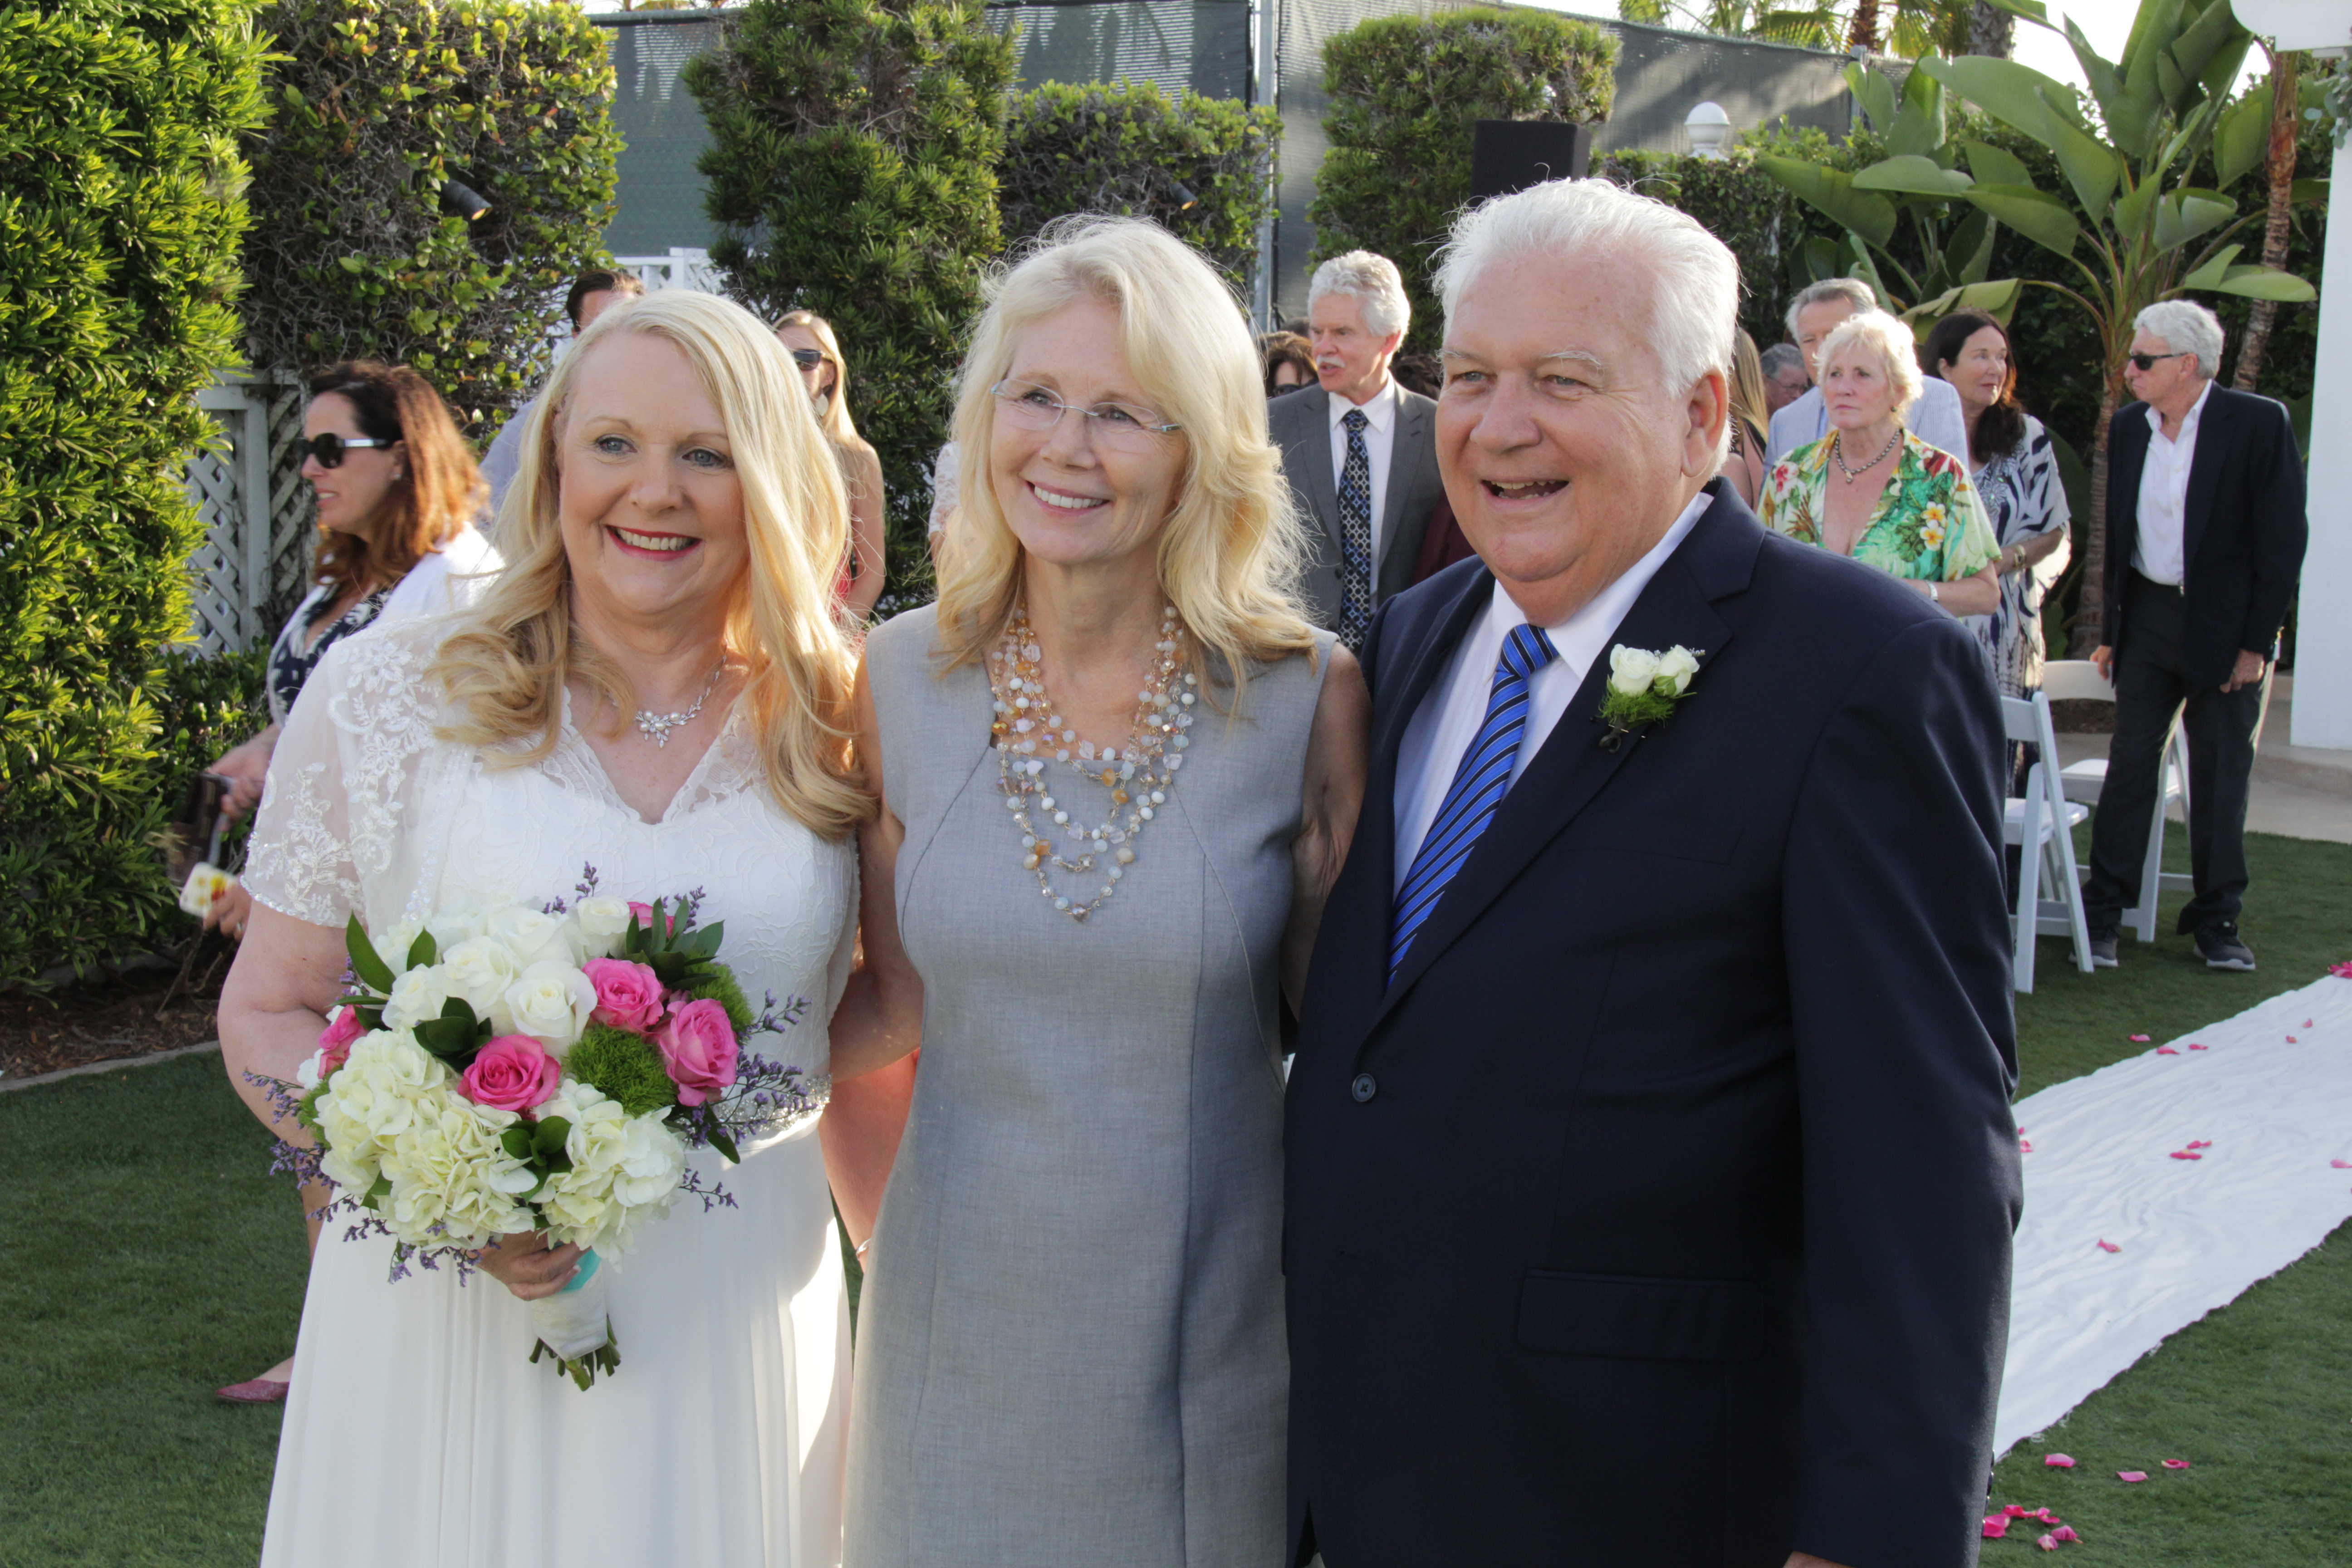 San Diego wedding officiant august 6, 2016 Jerry and mary